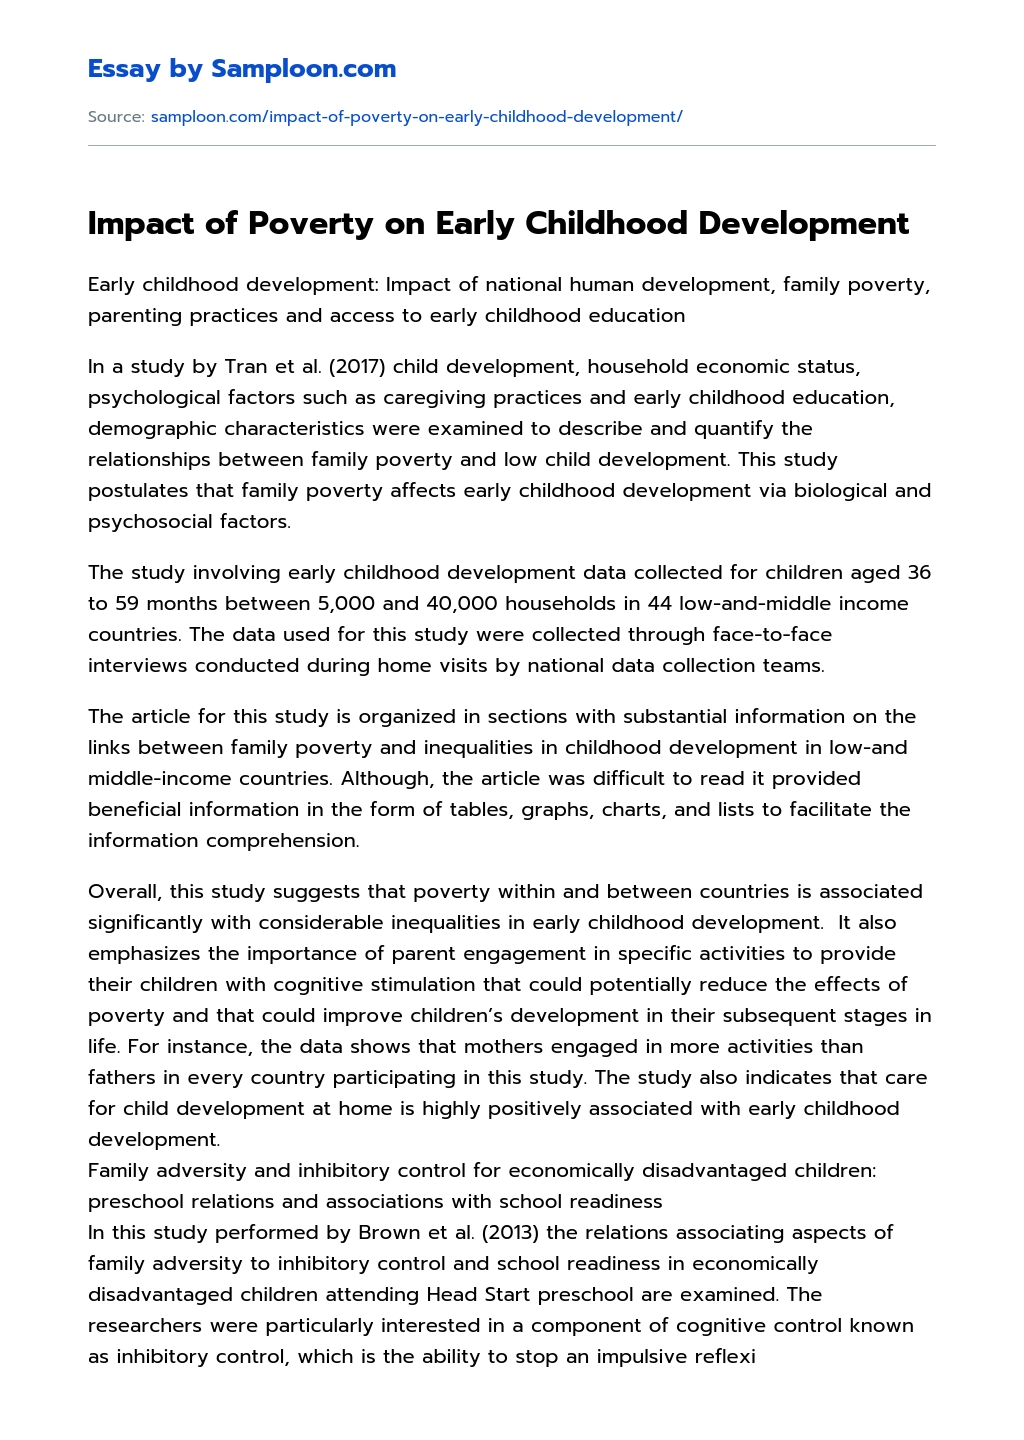 Impact of Poverty on Early Childhood Development  essay